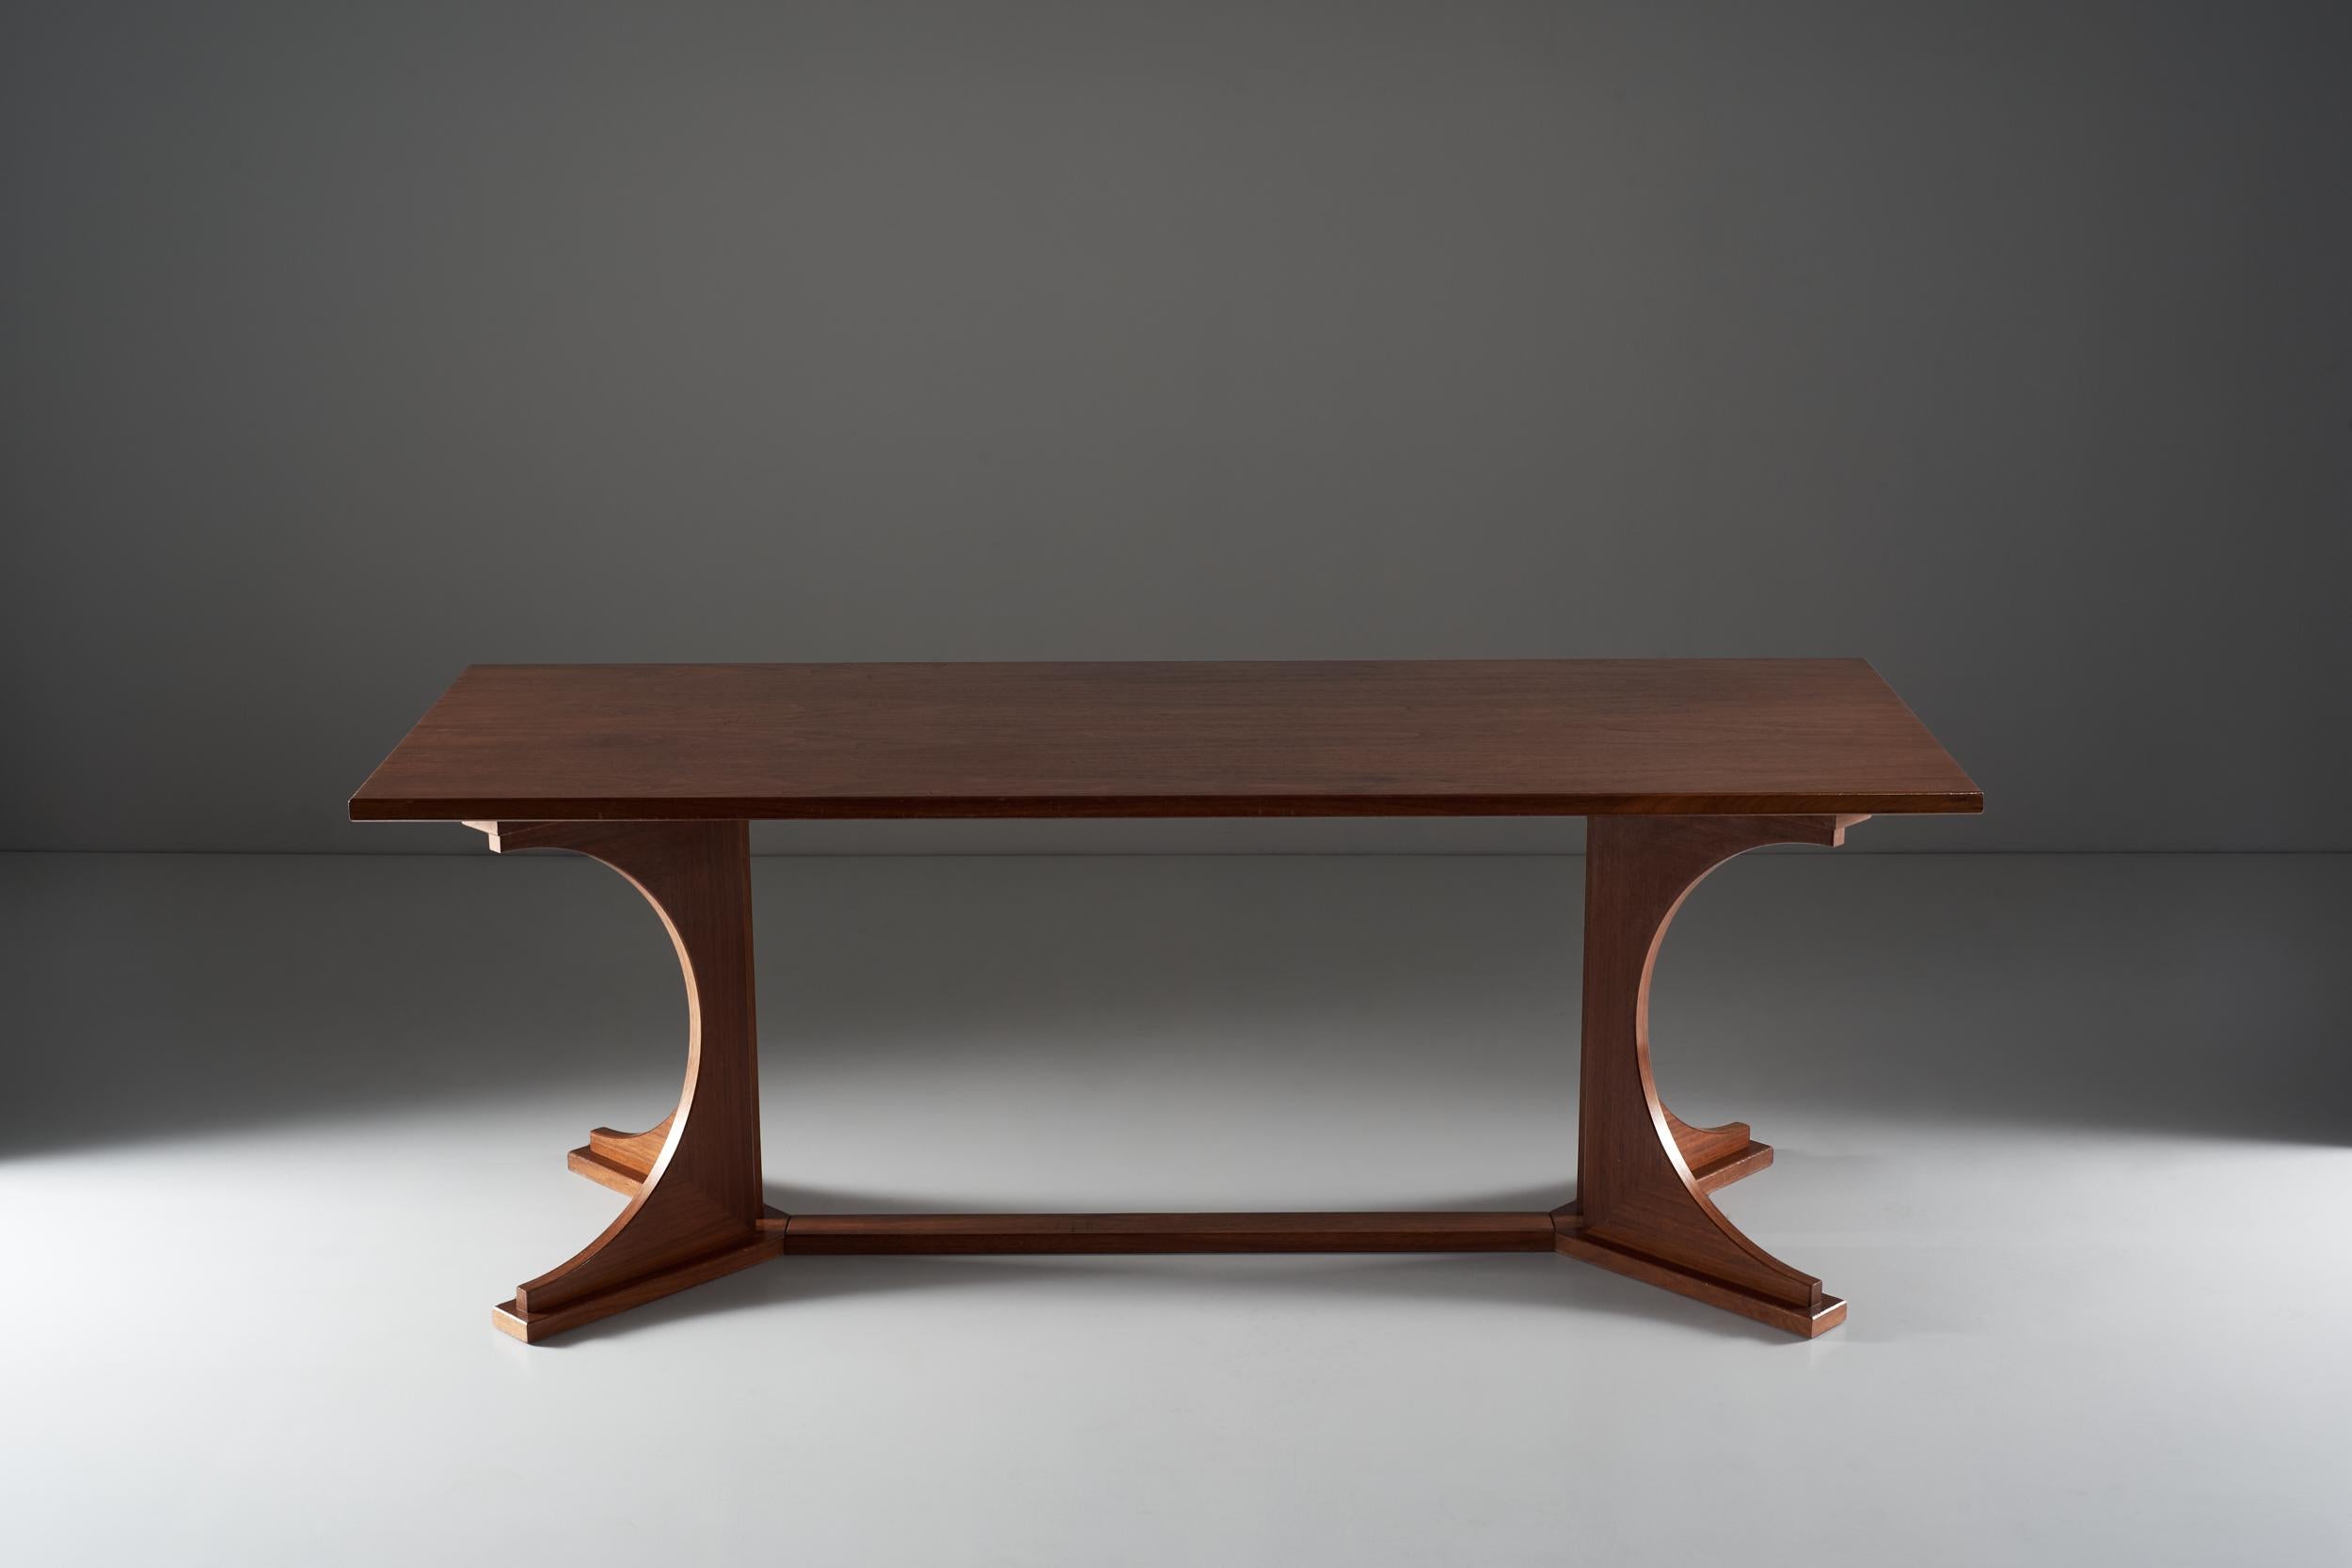 The table designed by Albini has unique aesthetic linguistic variations, the shape of the rectangular top is precise and proportioned to the support. The central rectangle in the intermezzo between top and support defines Albini's symmetrical